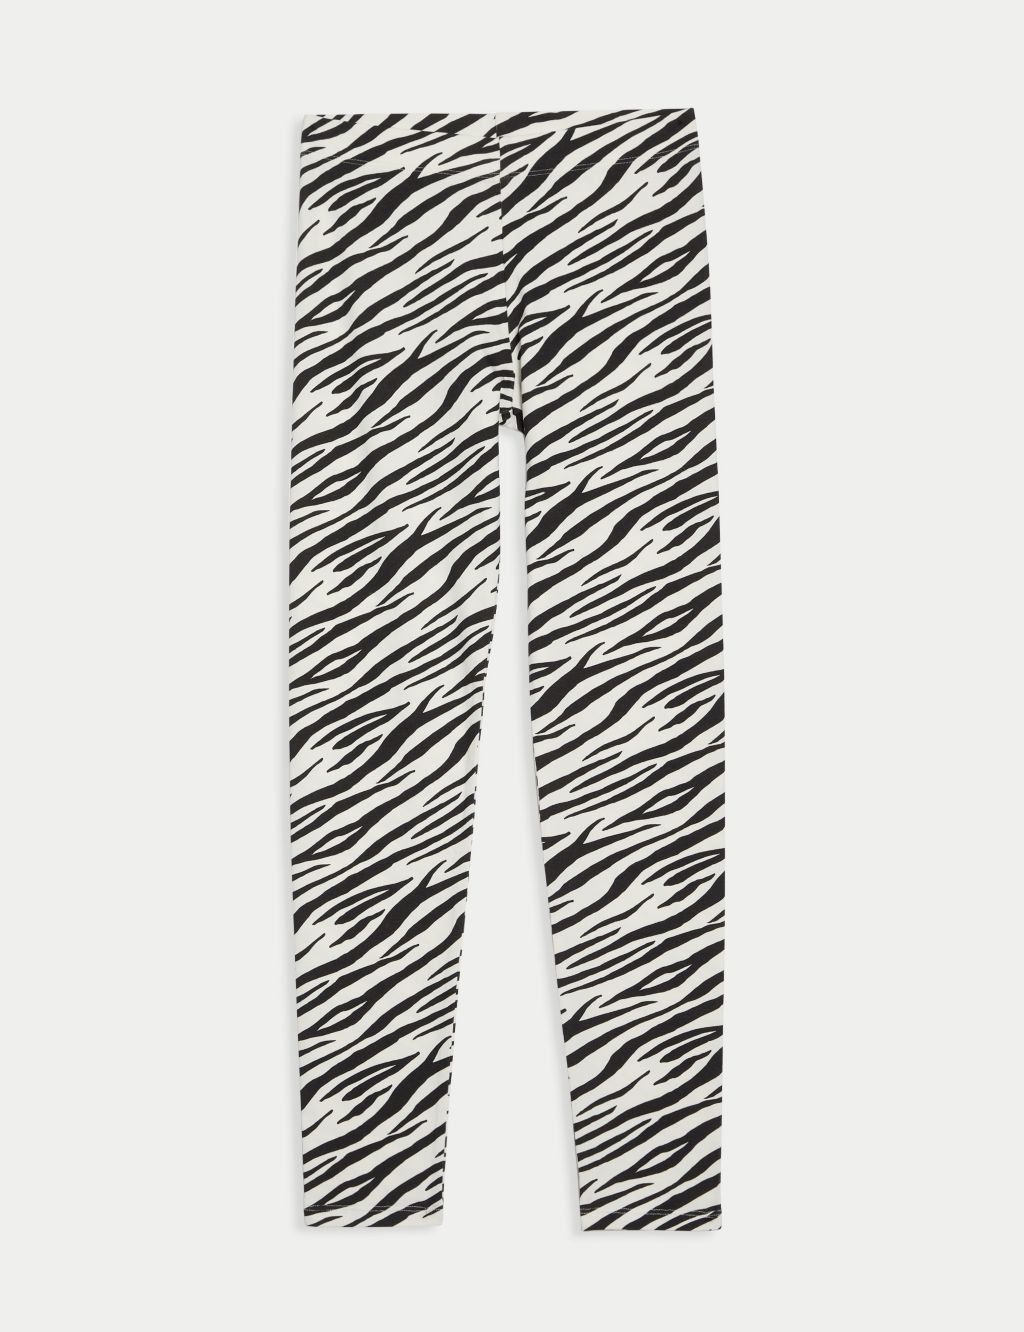 Cotton Rich Patterned Leggings (6-16 Yrs) image 2